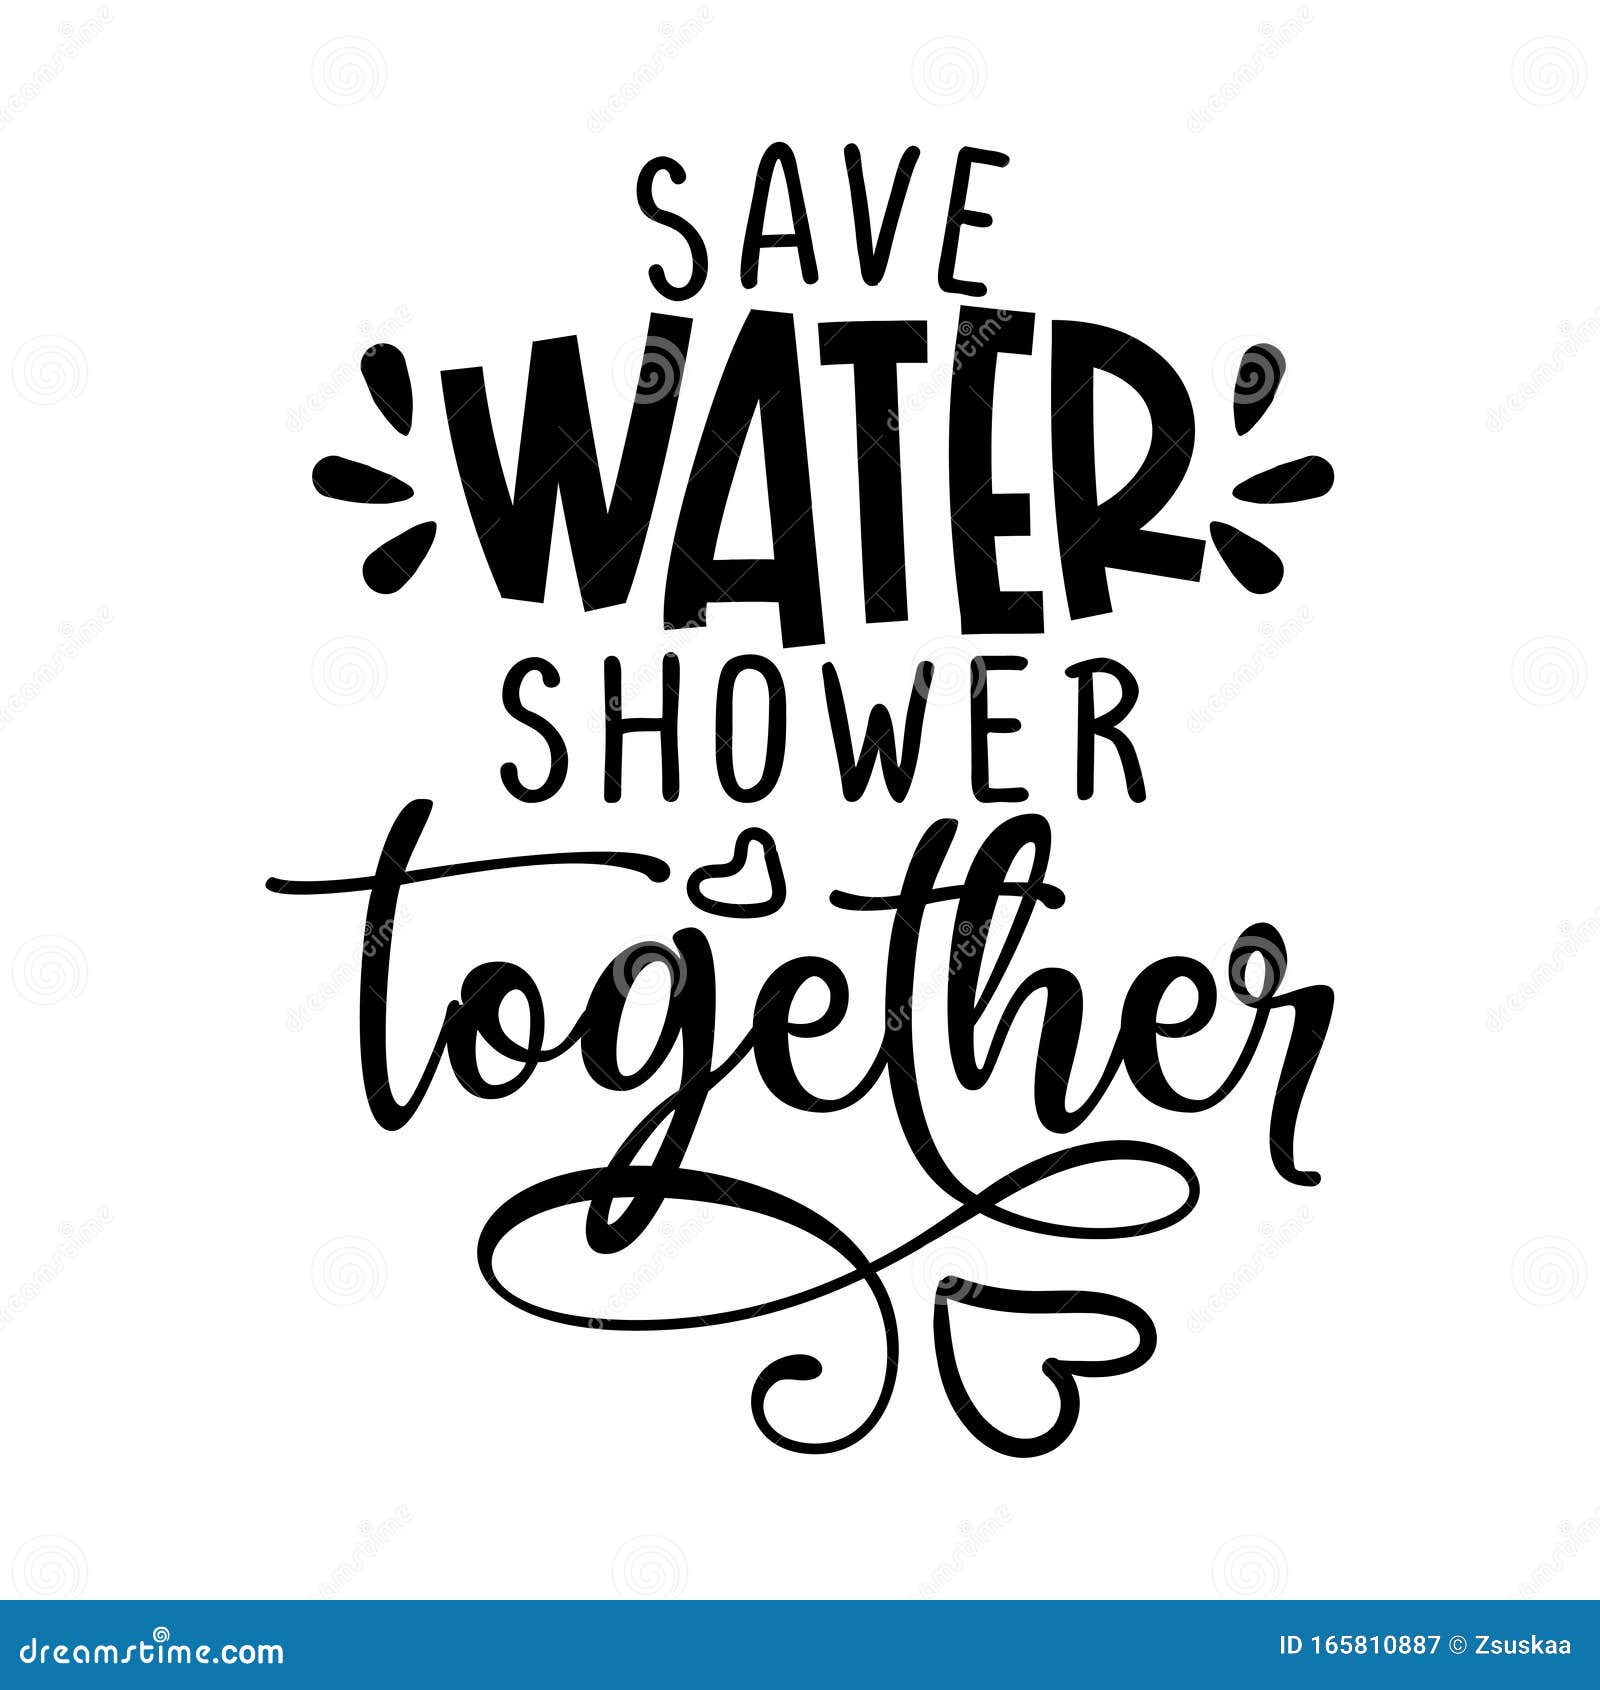 Save water, shower together - funny vector text quotes. 